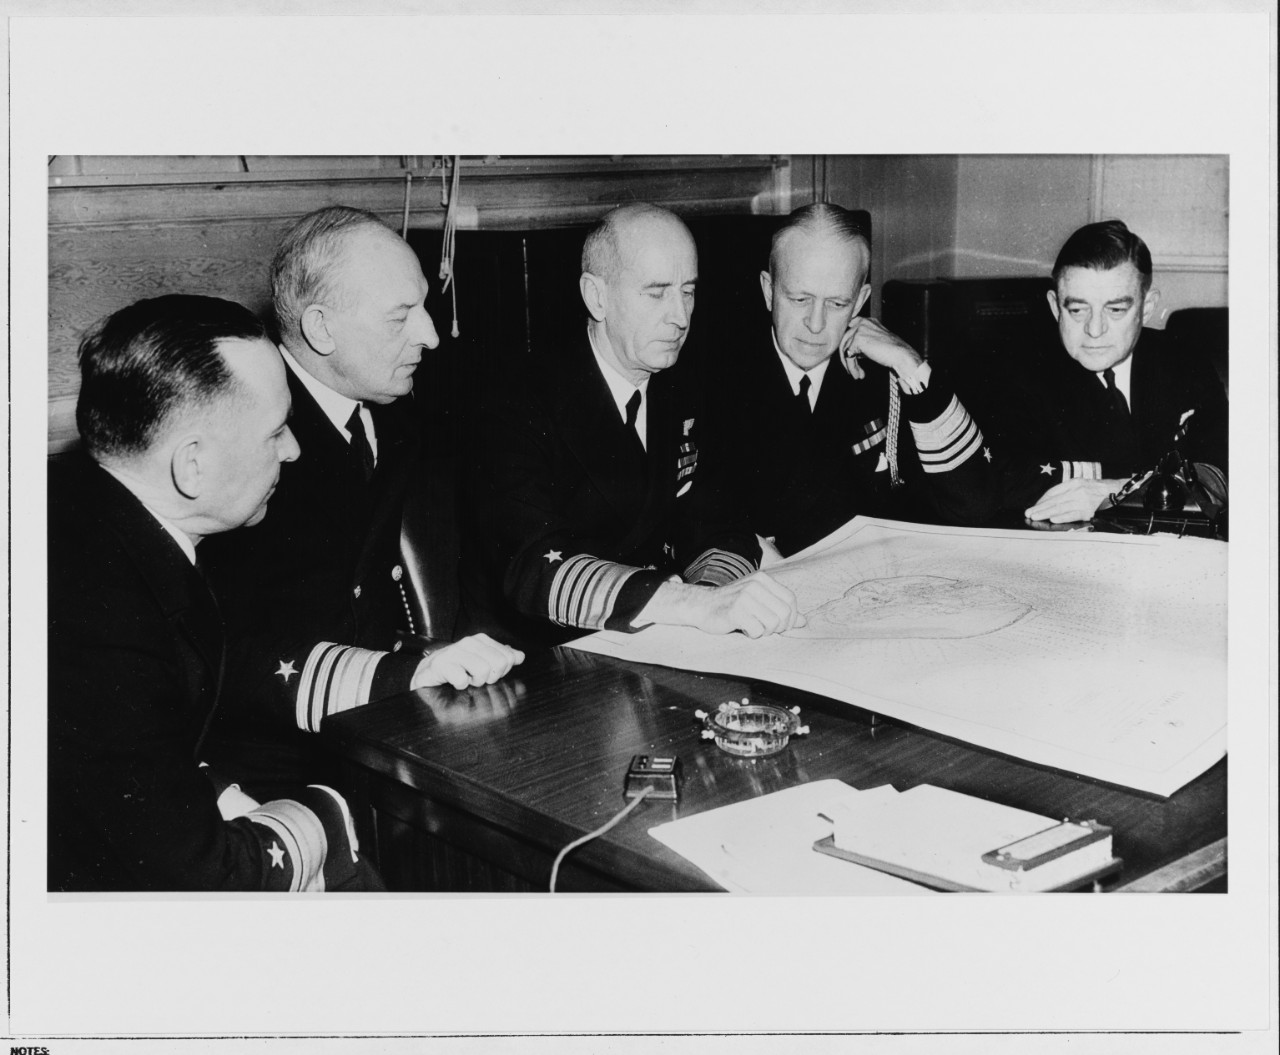 Chief of Naval Operations and Staff, 1942